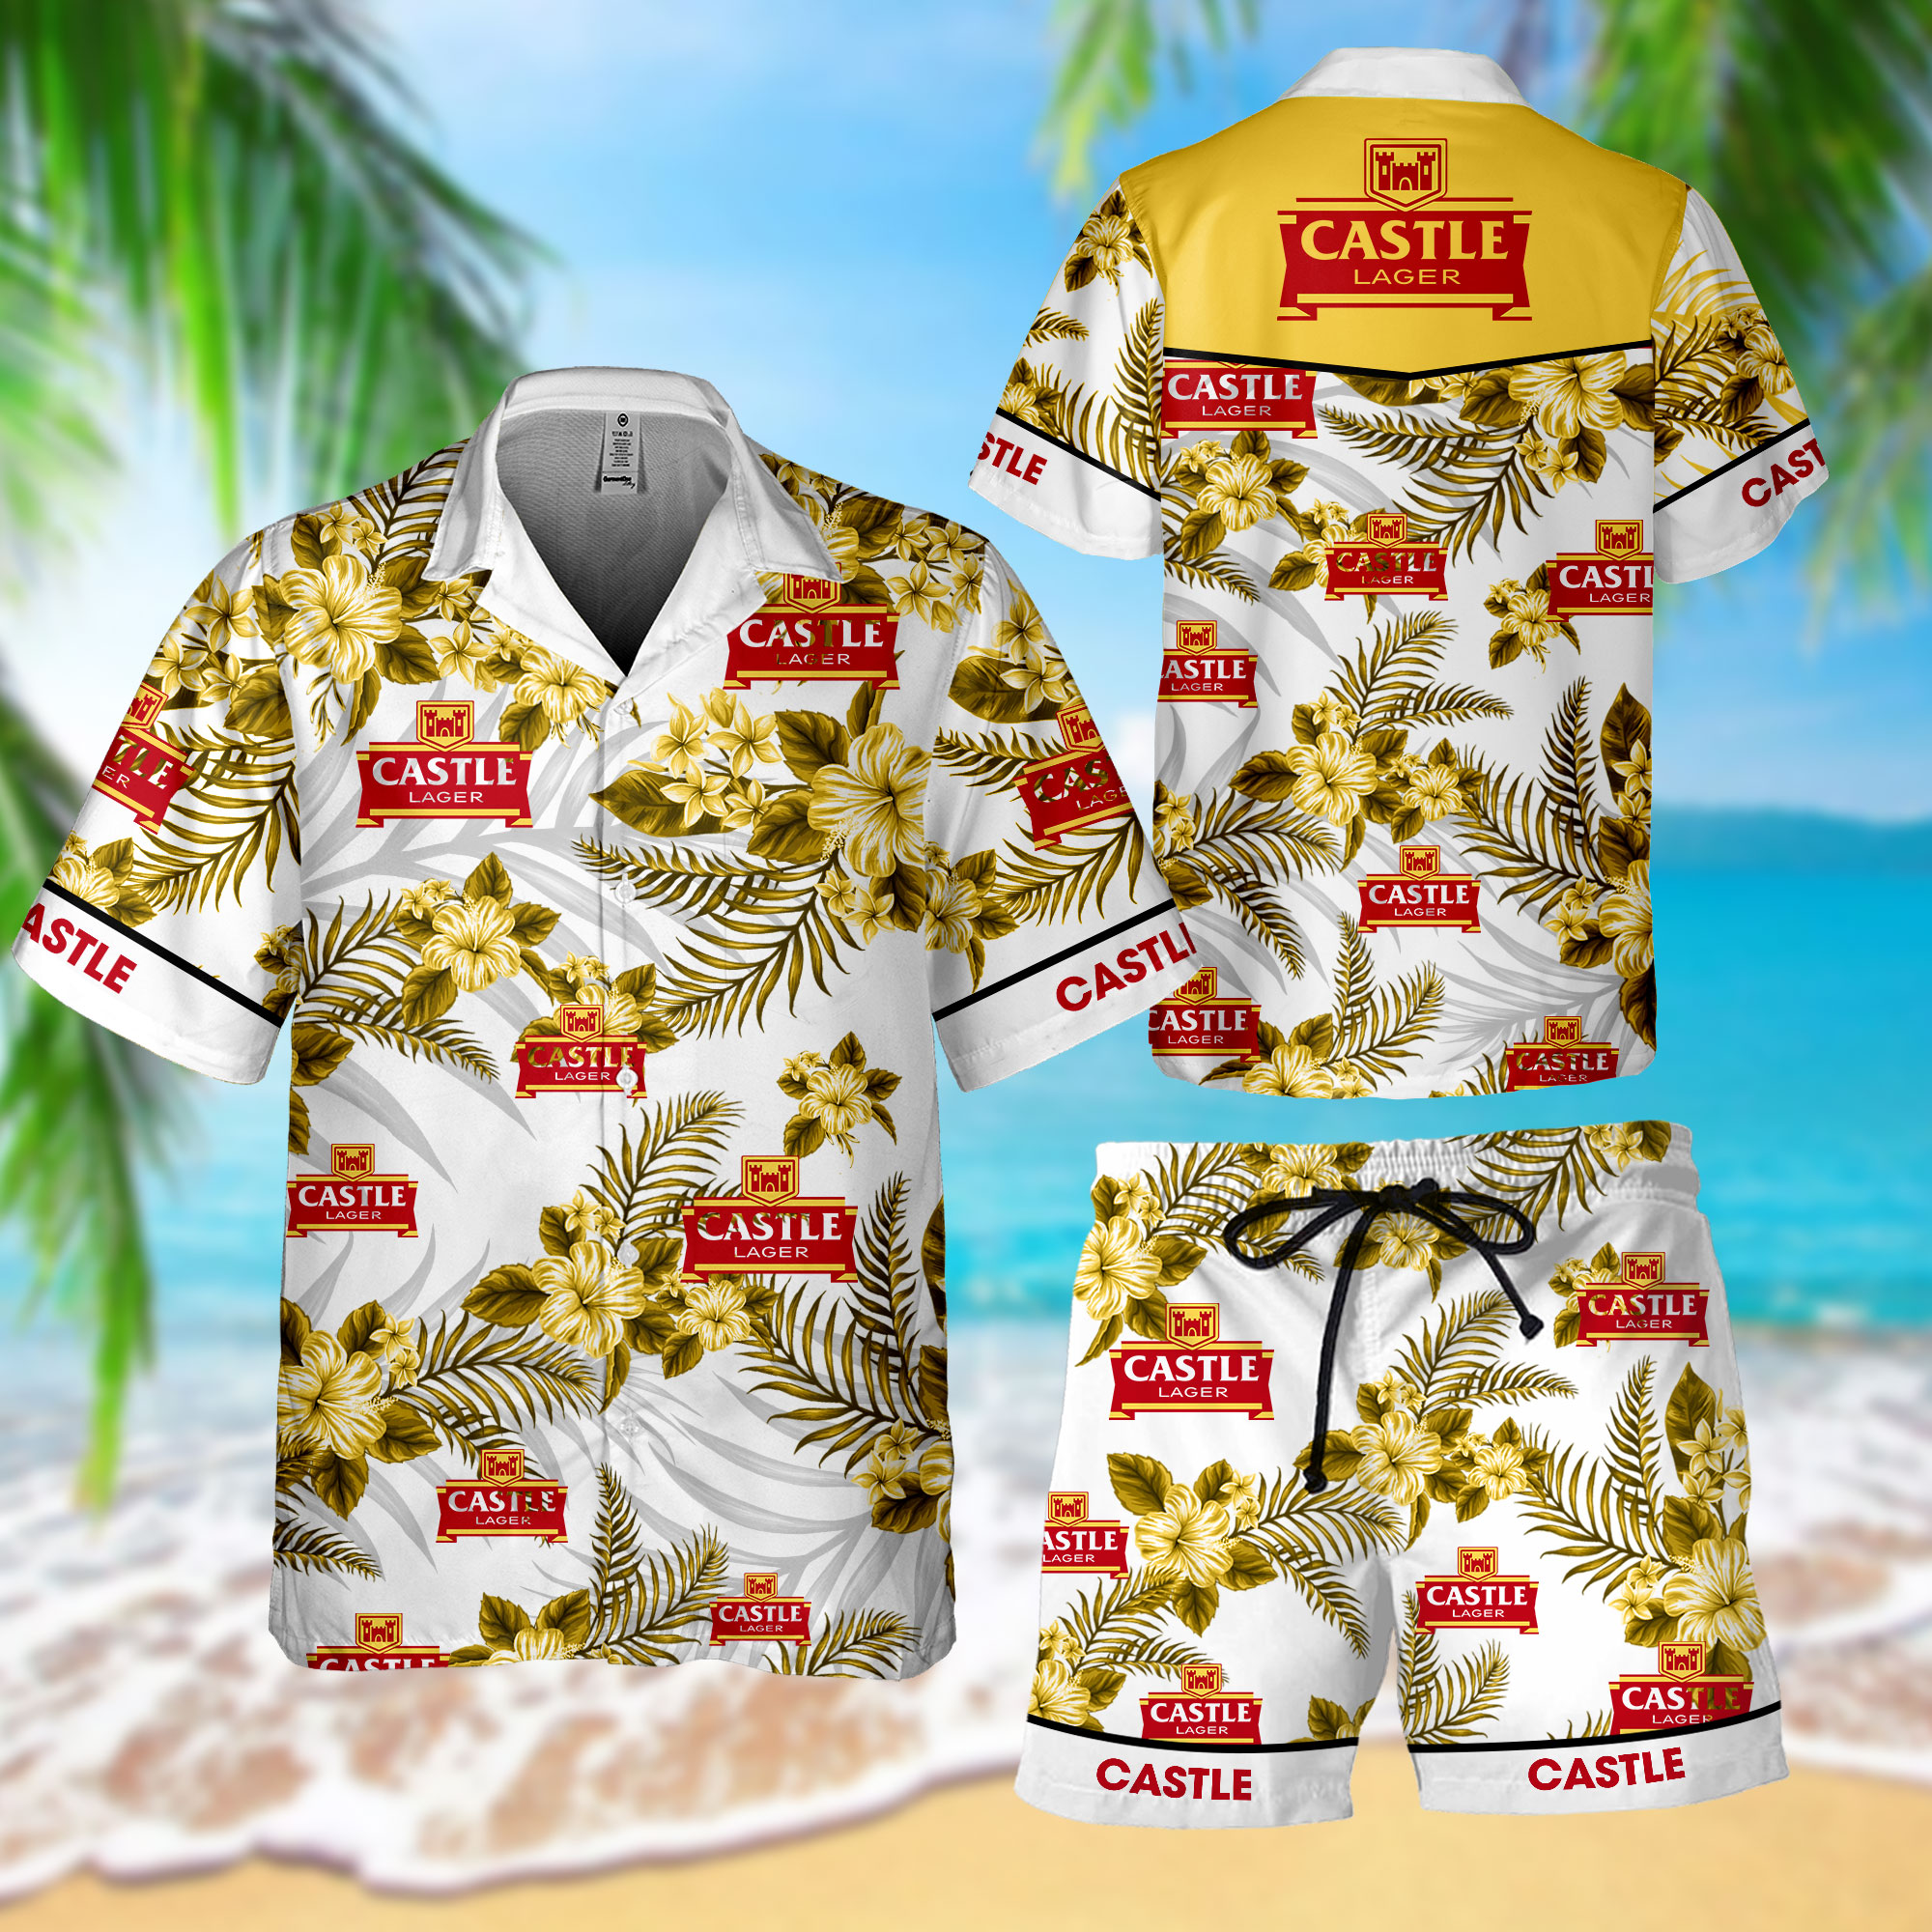 NEW Castle Lager Hawaii Shirt, Shorts1